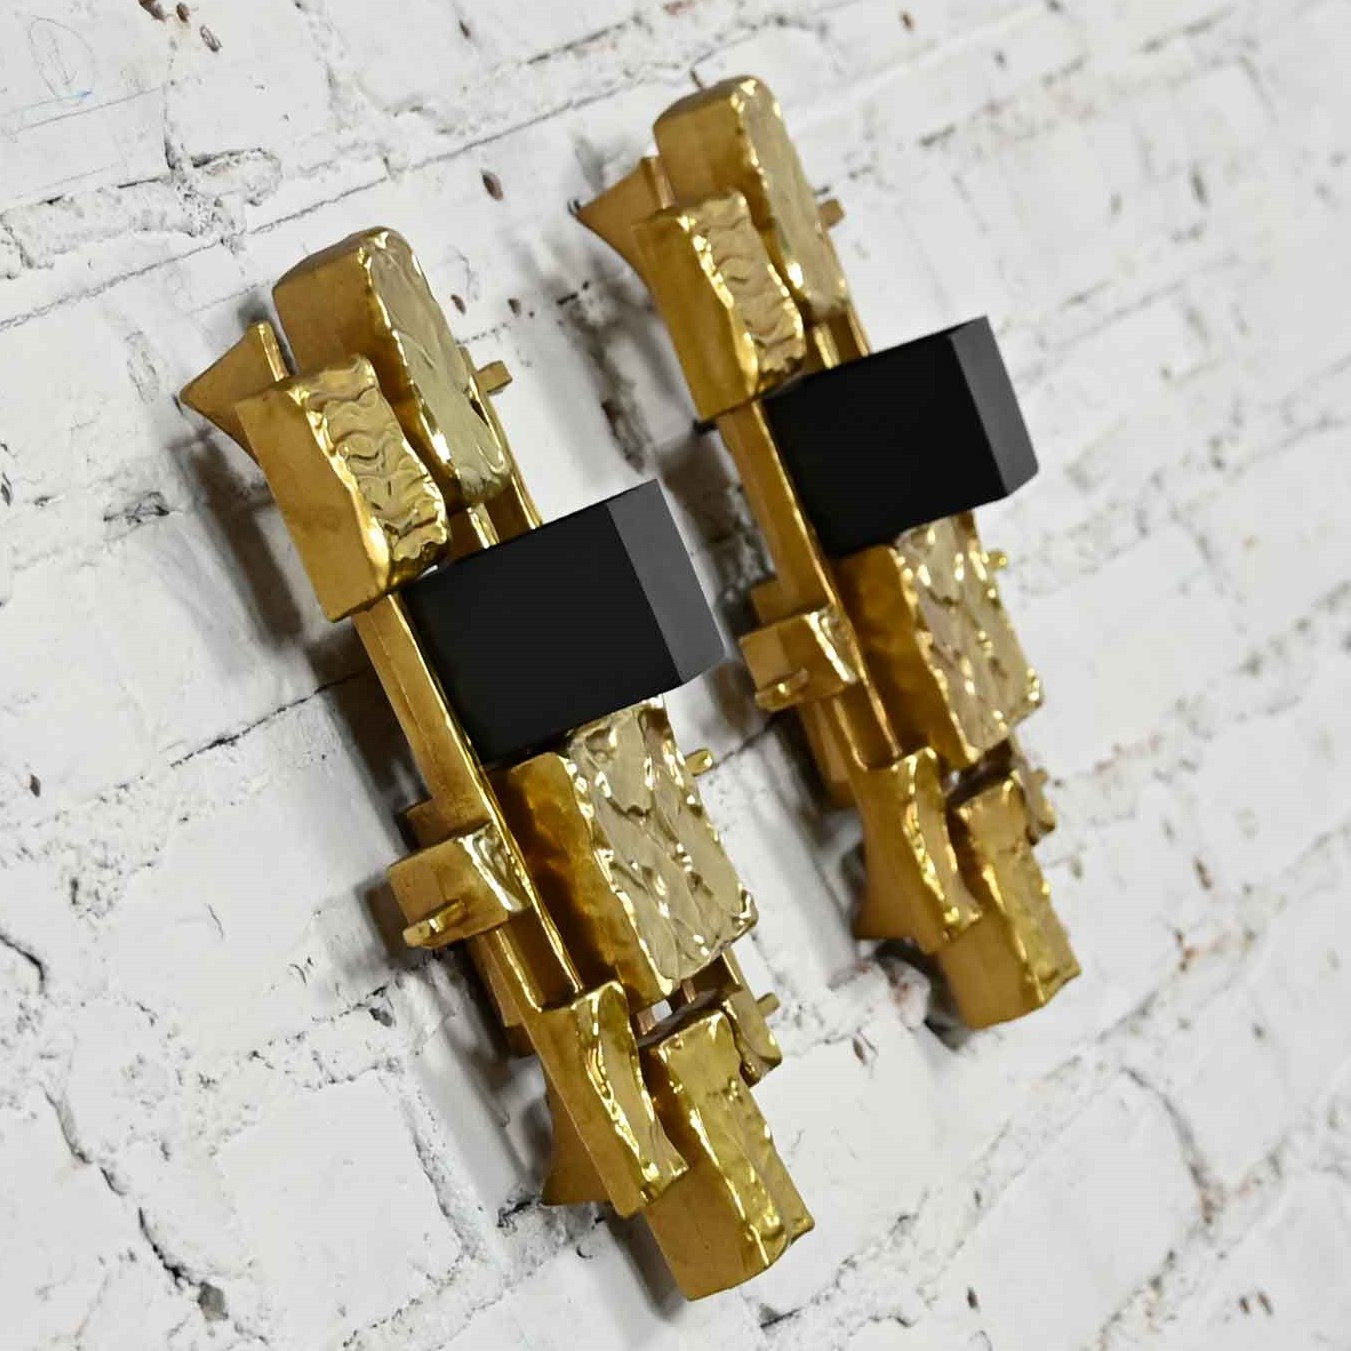 Mid-Century Modern Brutalist Plastic Wall Sconces Model #4050 by Dart Industries, a Pair